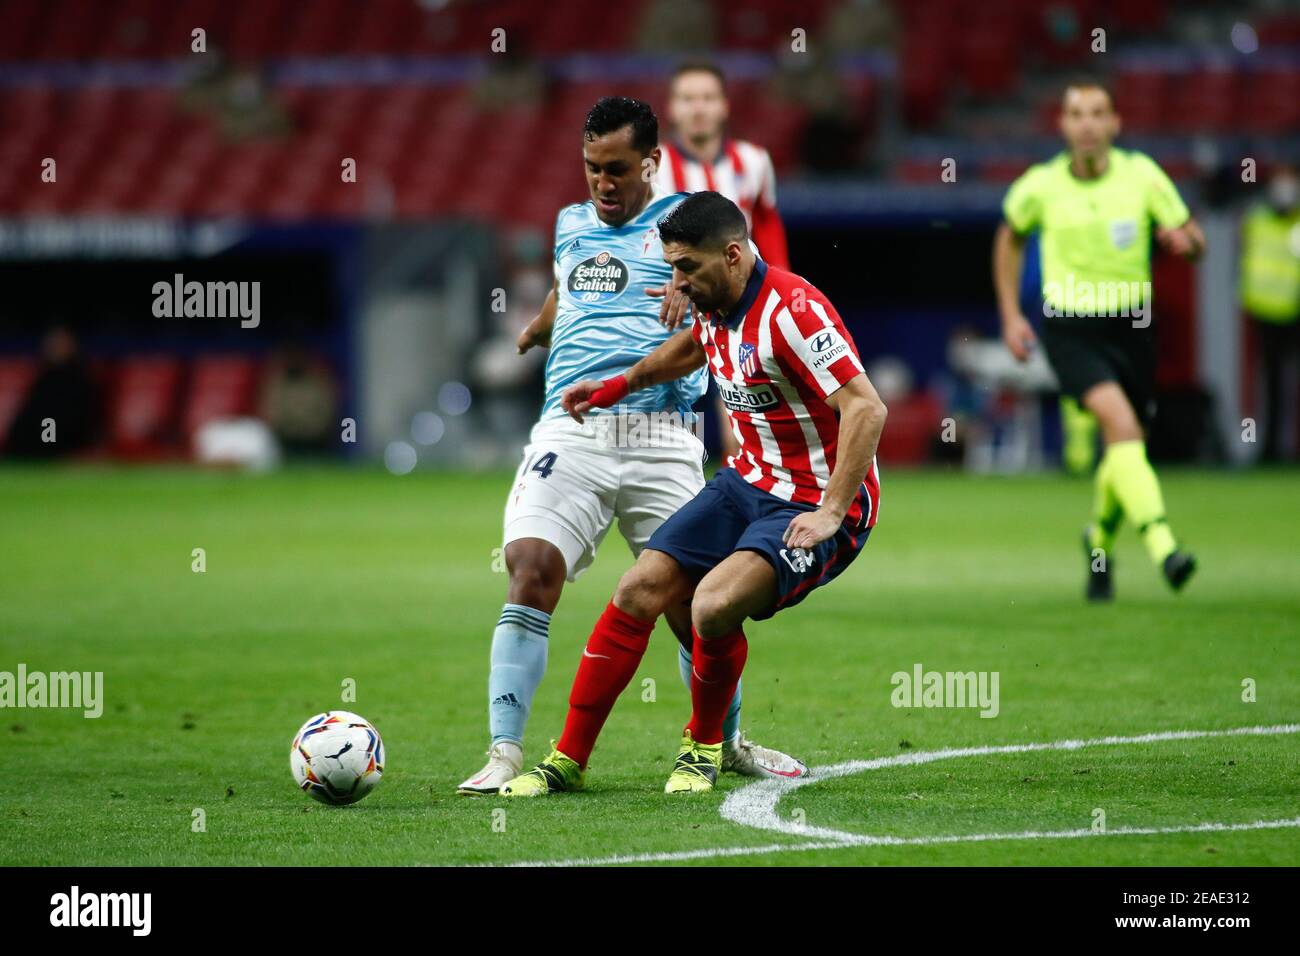 Luis Suarez of Atletico de Madrid and Renato Tapia of Celta in action during the Spanish championship La Liga football match be / LM Stock Photo